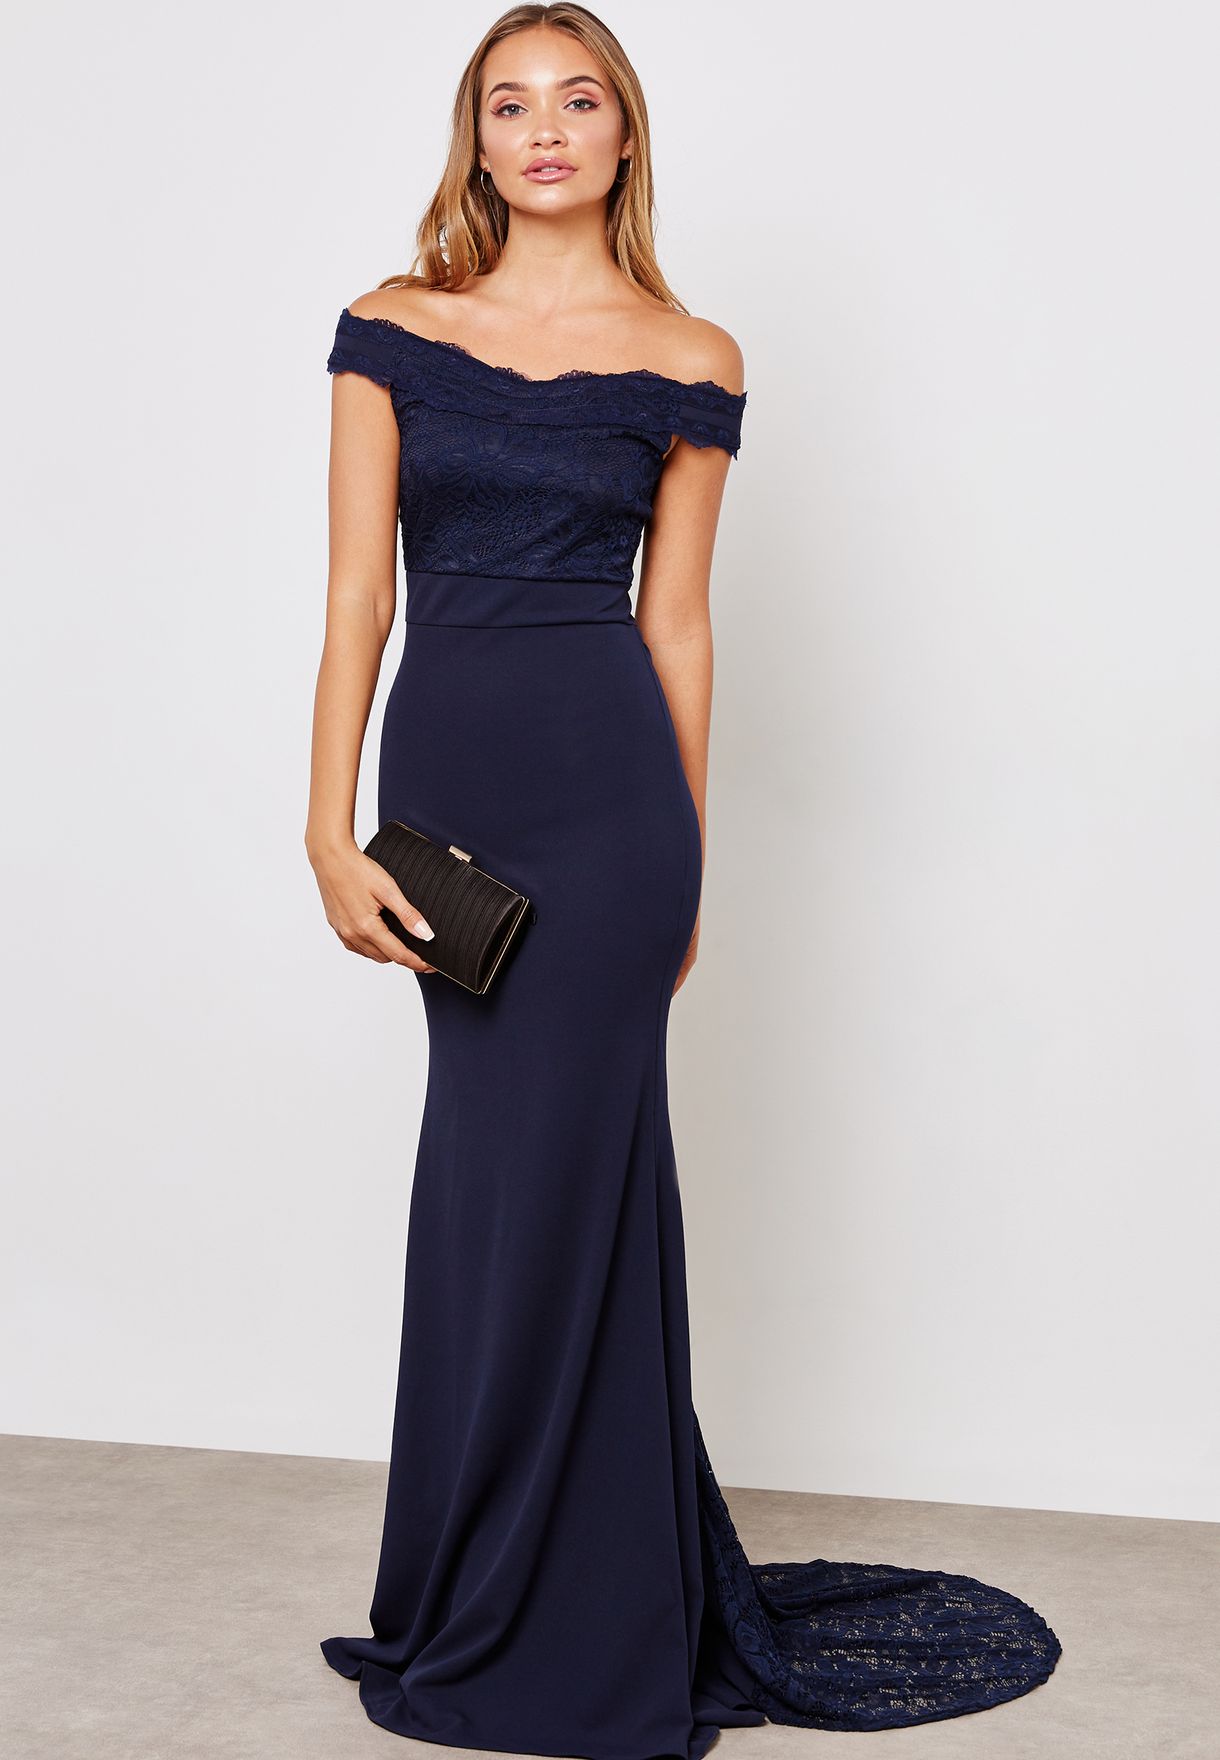 Buy missguided bridesmaid dress> OFF-54%